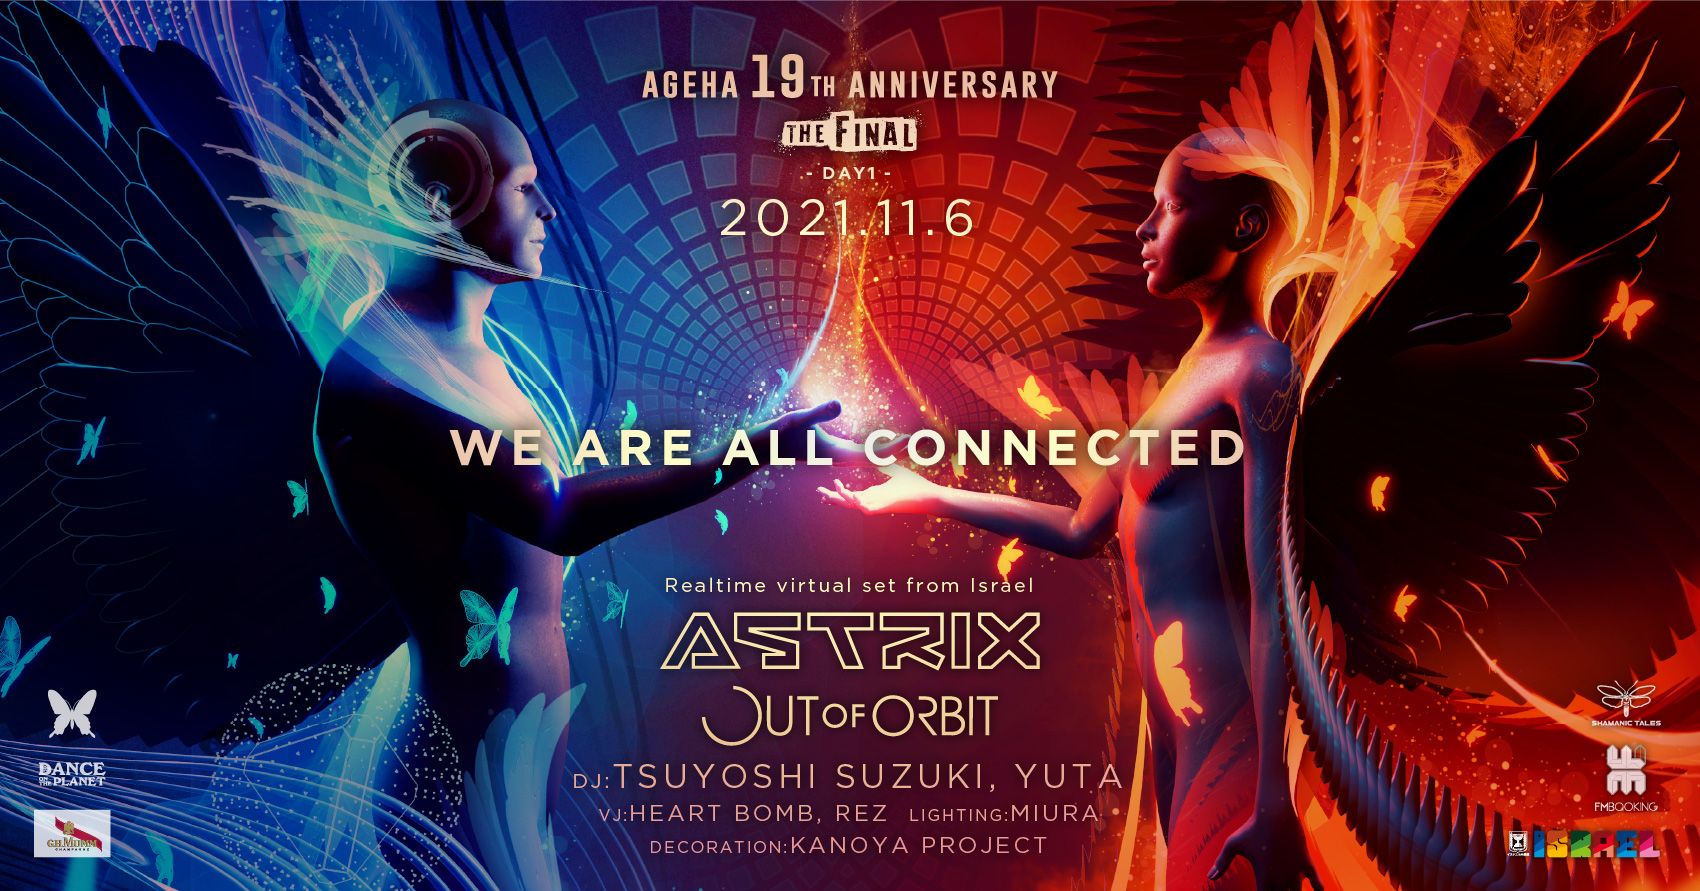 ageHa 19th Anniversary “THE FINAL” DAY-1 "WE ALL CONNECTED"